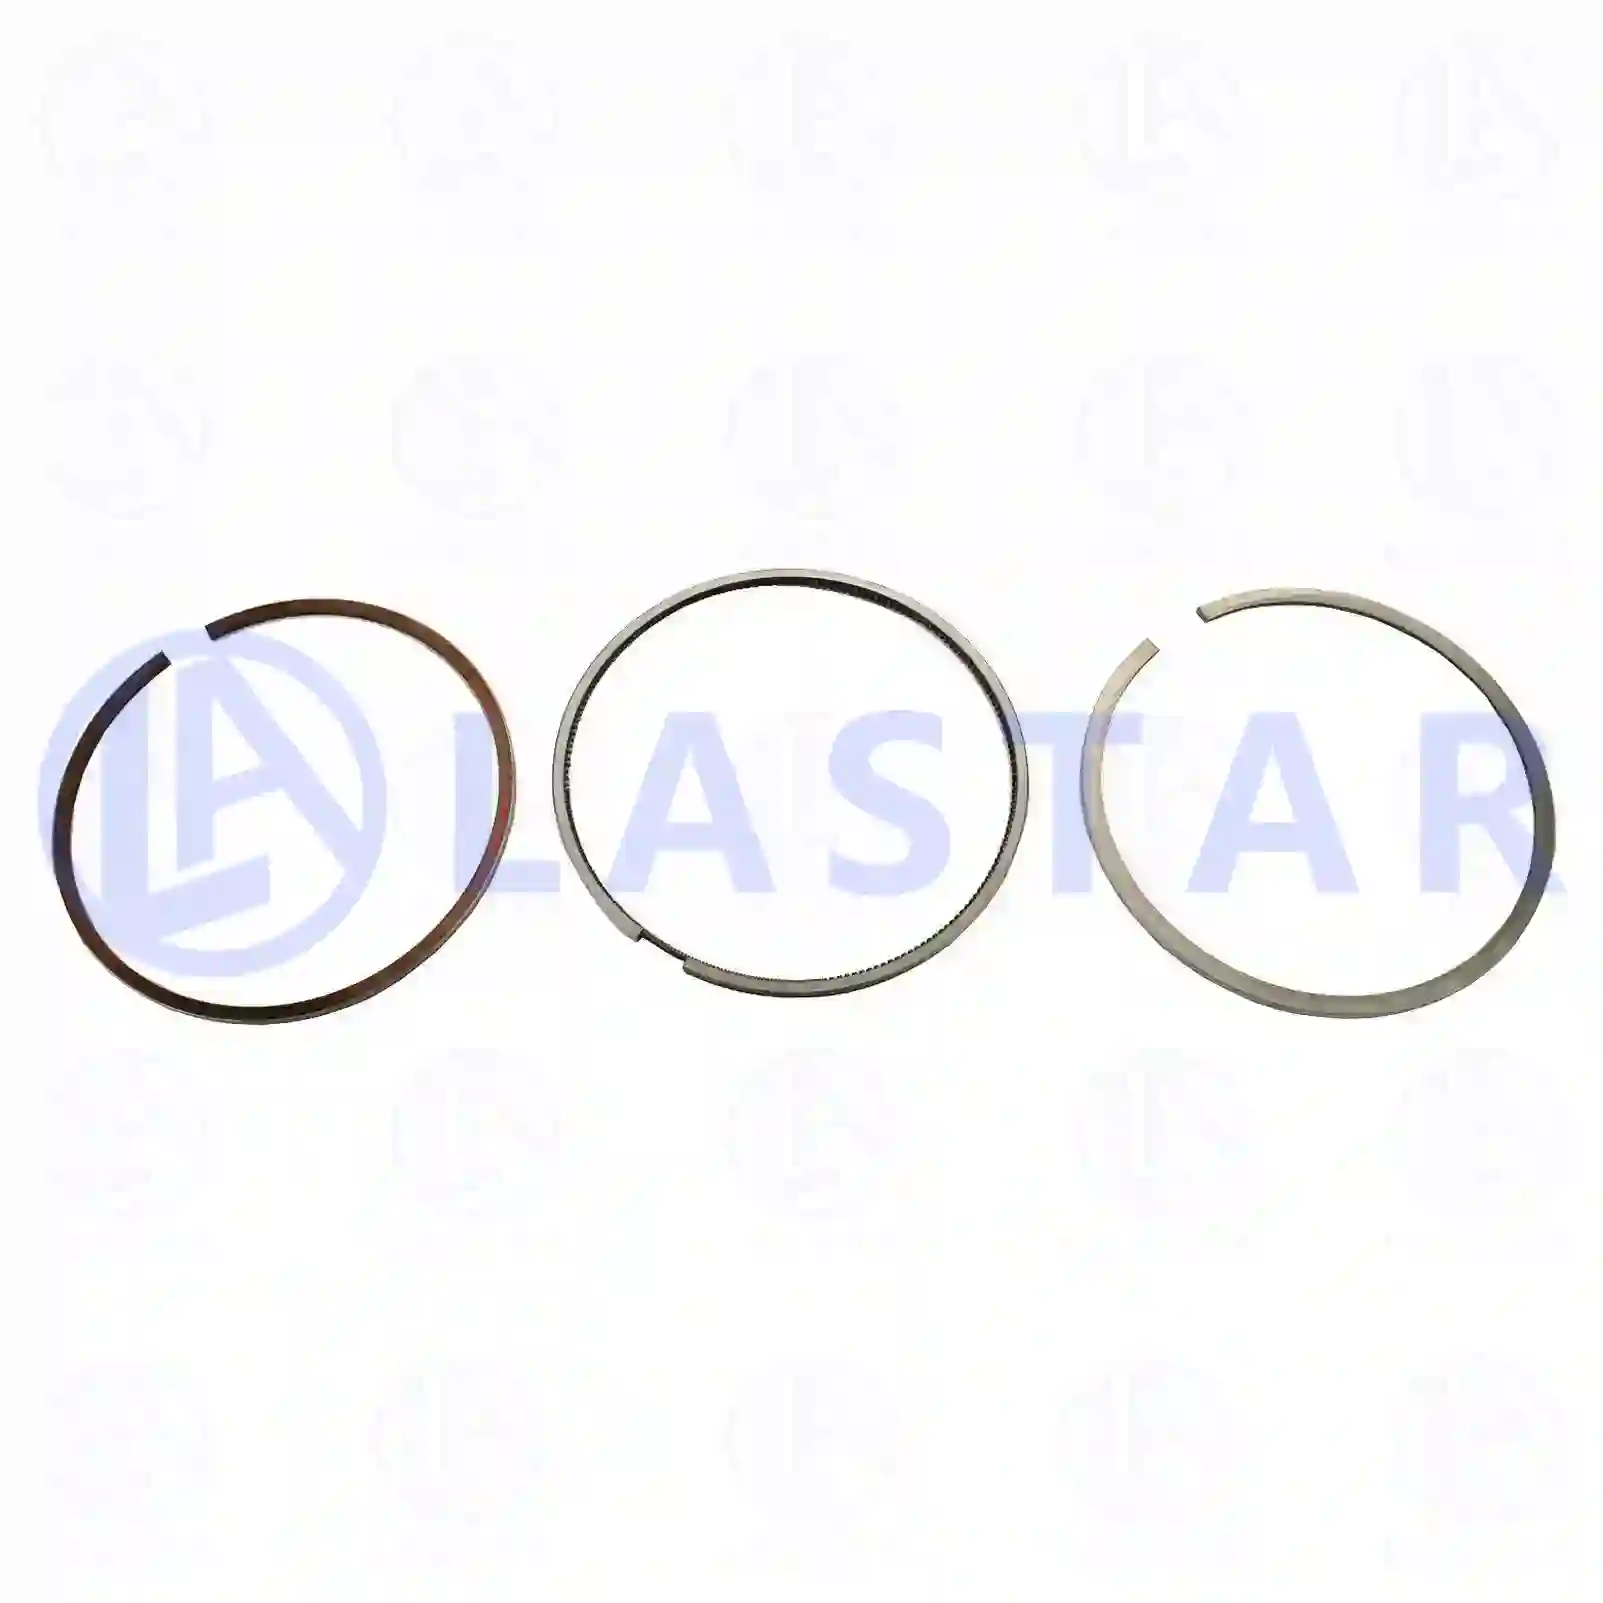 Piston with liner, 77702605, 4420300137, 44403 ||  77702605 Lastar Spare Part | Truck Spare Parts, Auotomotive Spare Parts Piston with liner, 77702605, 4420300137, 44403 ||  77702605 Lastar Spare Part | Truck Spare Parts, Auotomotive Spare Parts